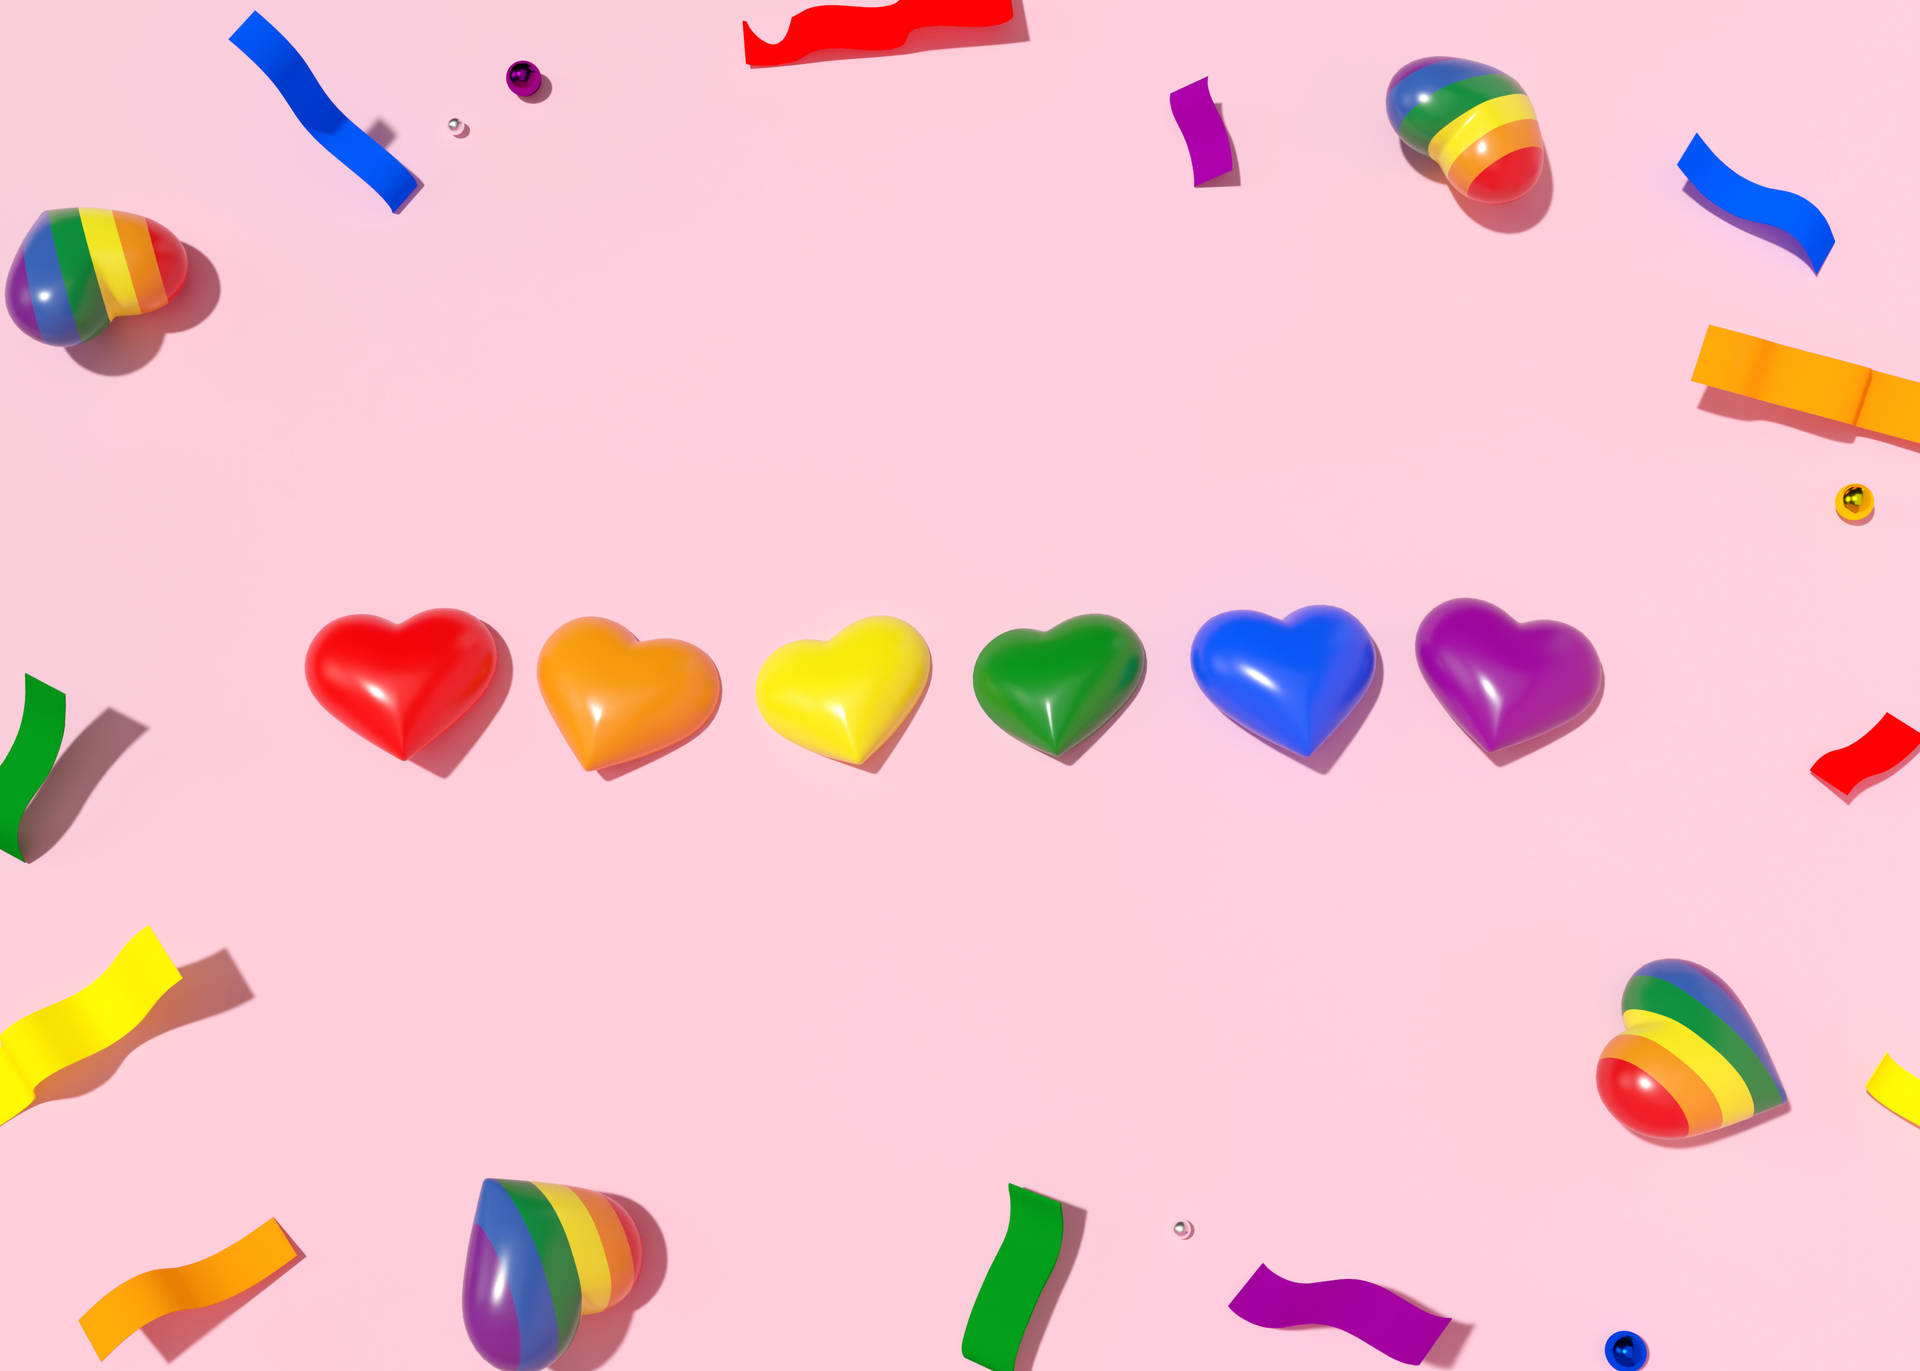 Rainbow-colored Aesthetic Heart Shapes Background